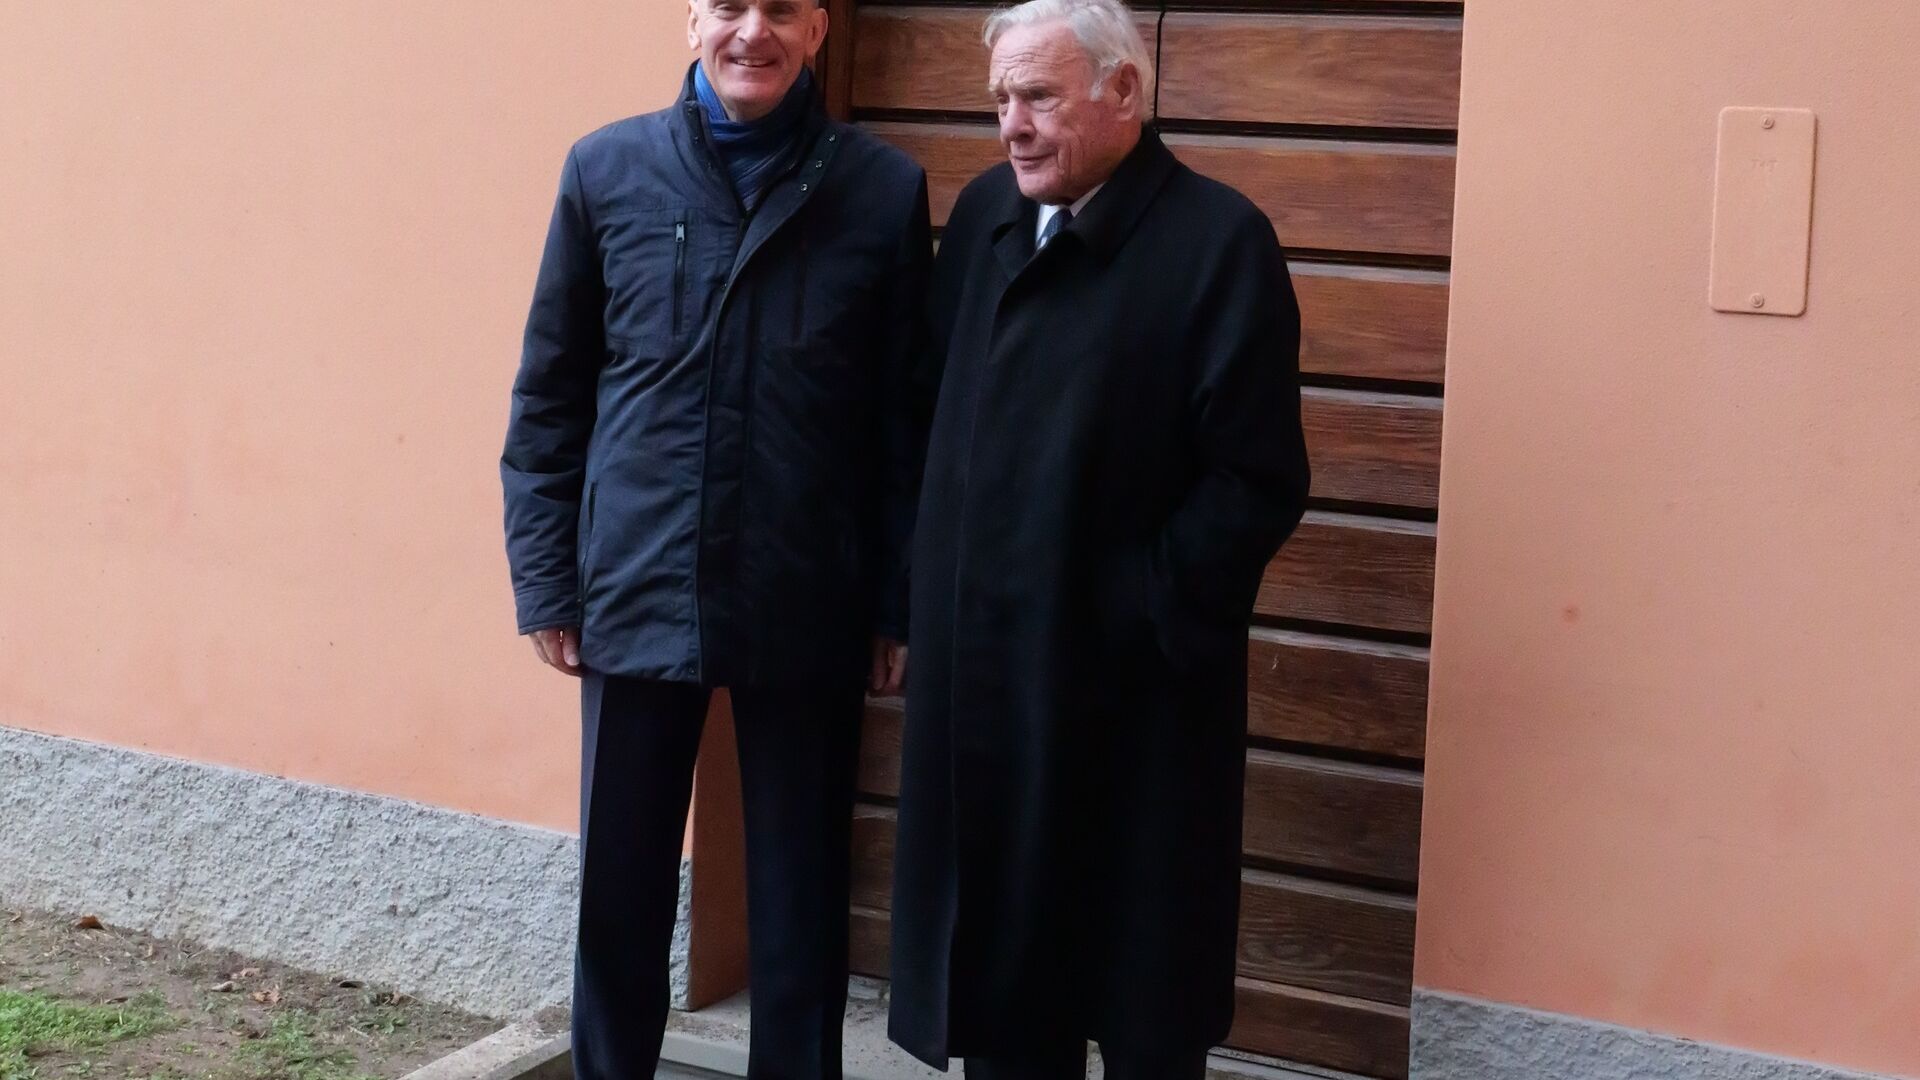 Human and natural sciences: Roberto Badaracco, Municipal of Lugano, and Arturo Licenziati, President and CEO of the IBSA Group, at the entrance to Casa Carlo Cattaneo on Christmas Eve 2022